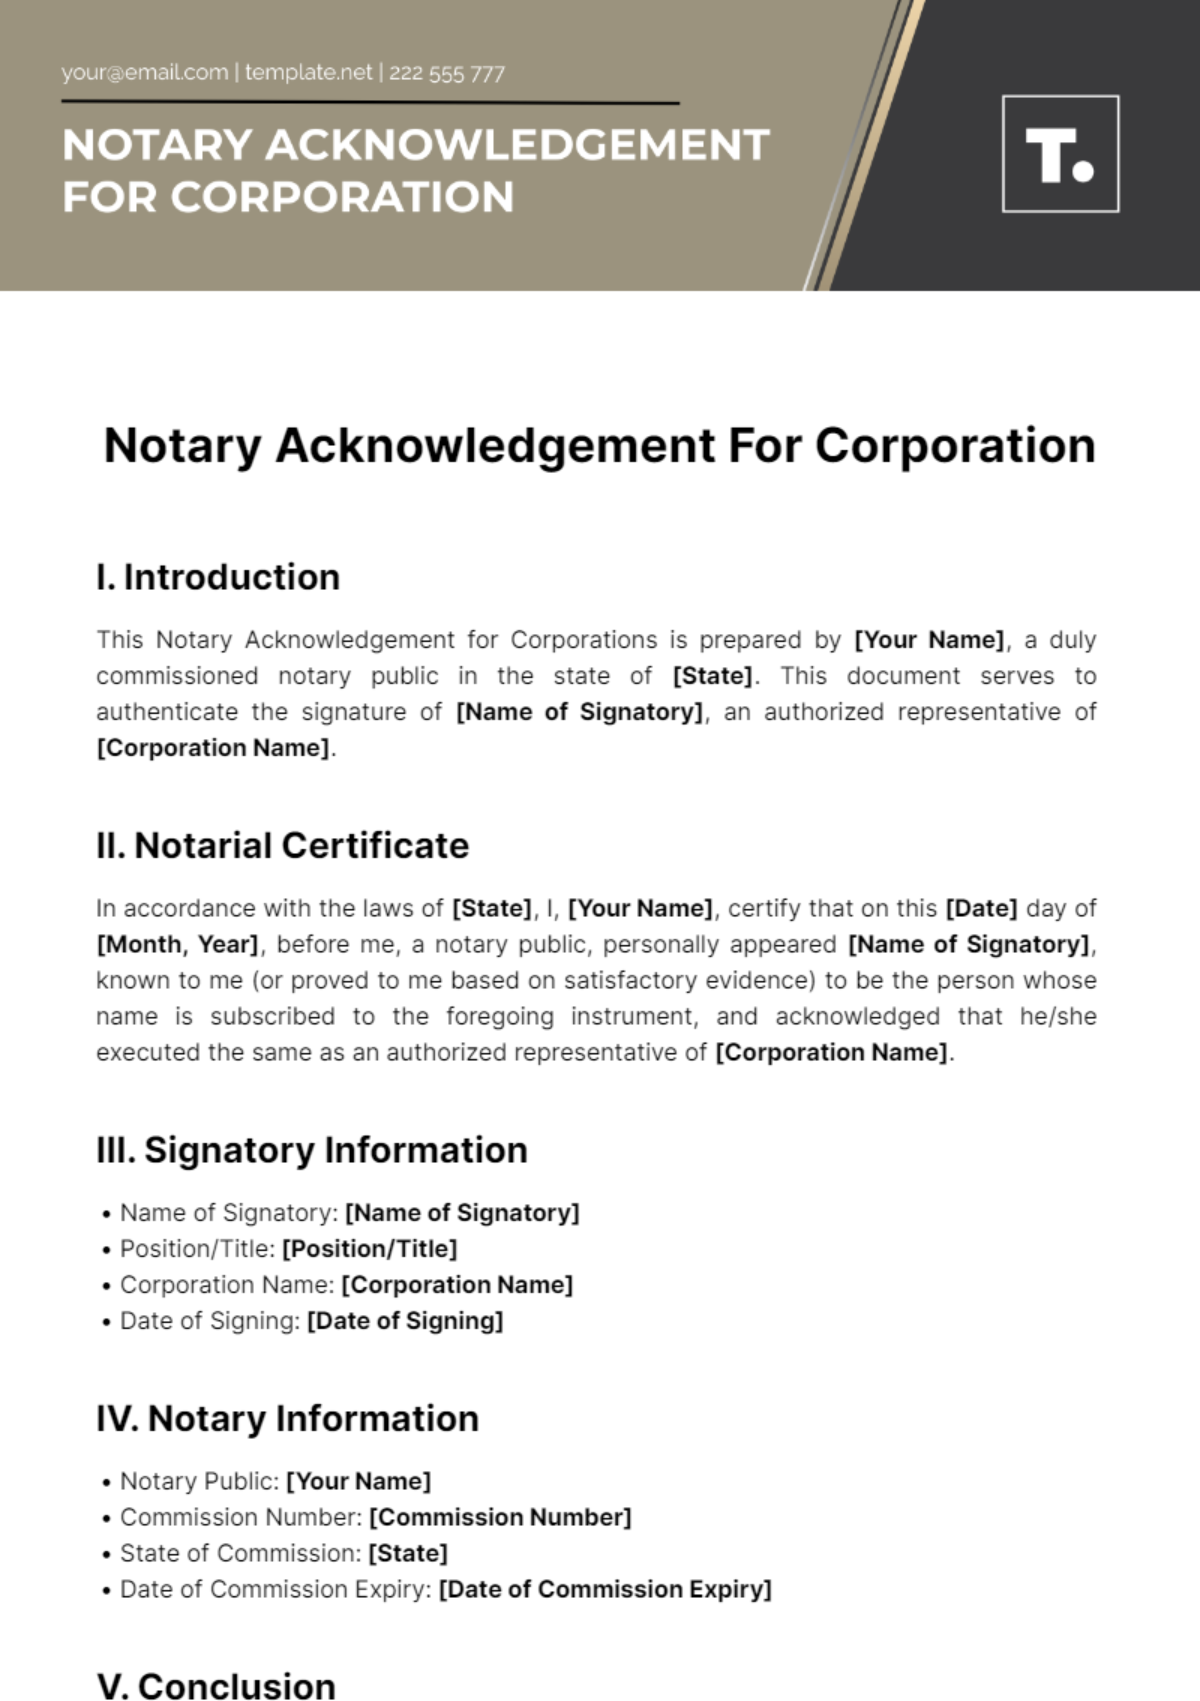 Notary Acknowledgement For Corporation Template